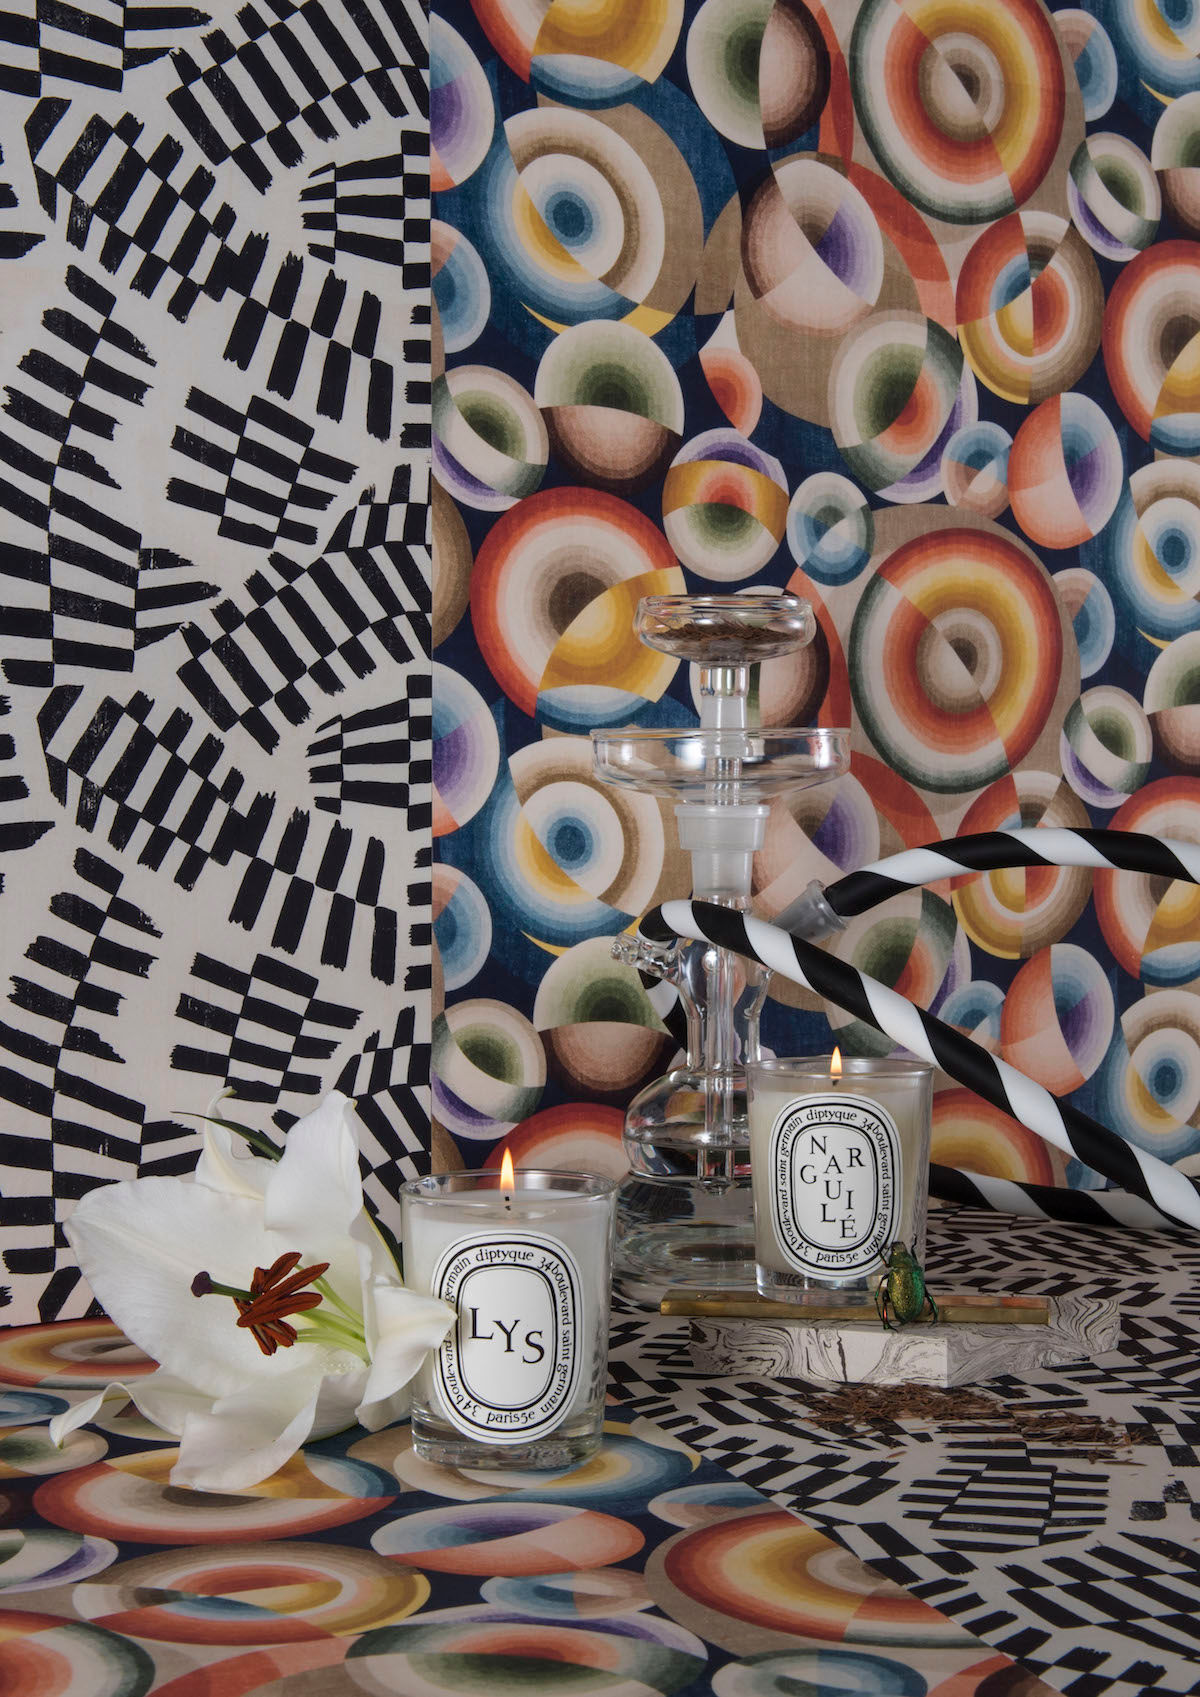 The mystique of Diptyque: The draw of the French fragrance house